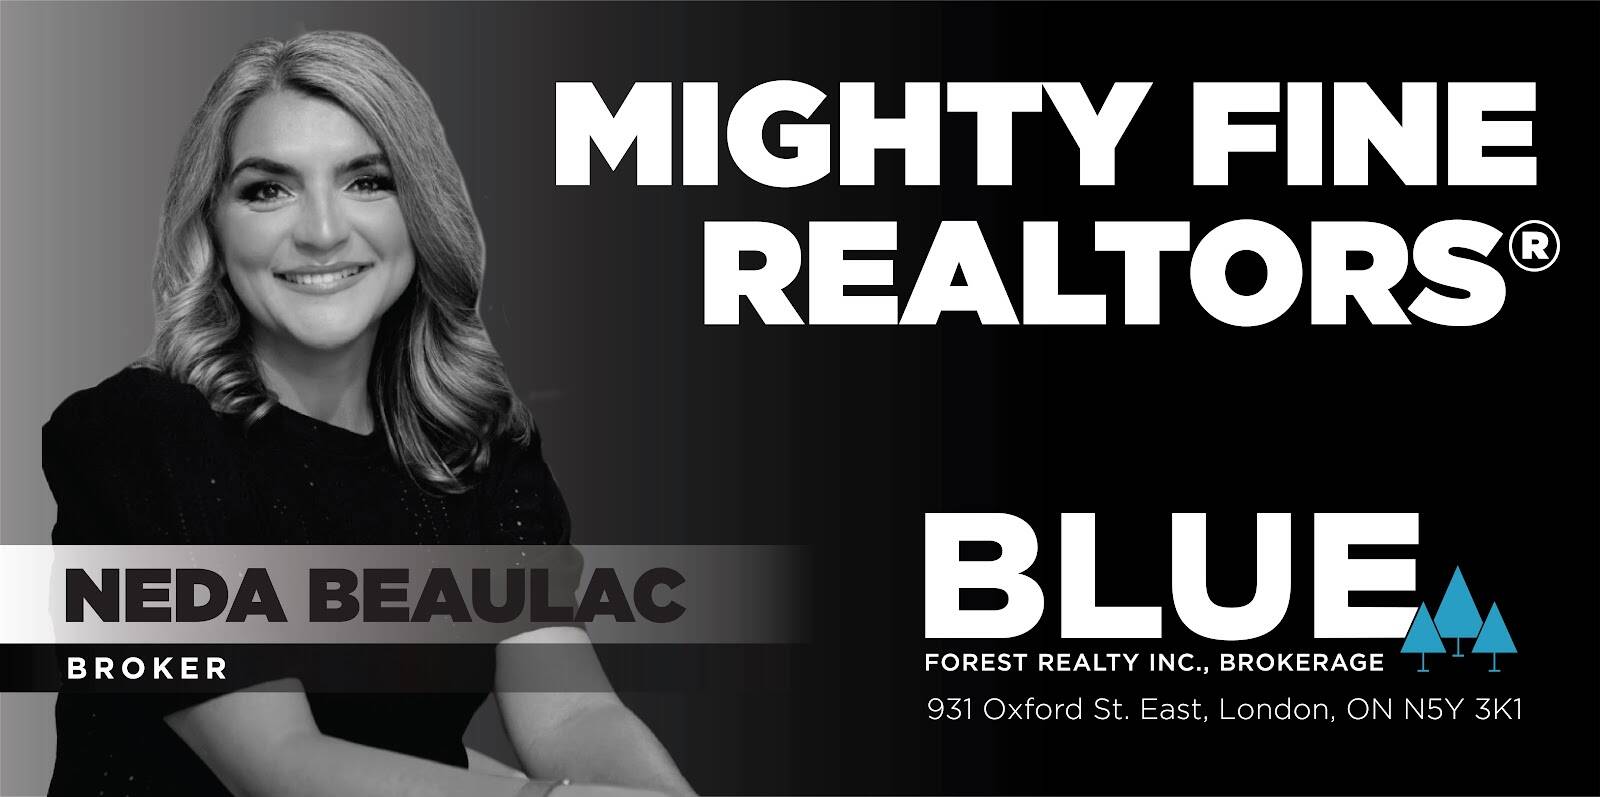 Nada_Beaulac - Blue Forest Reality Brokerage